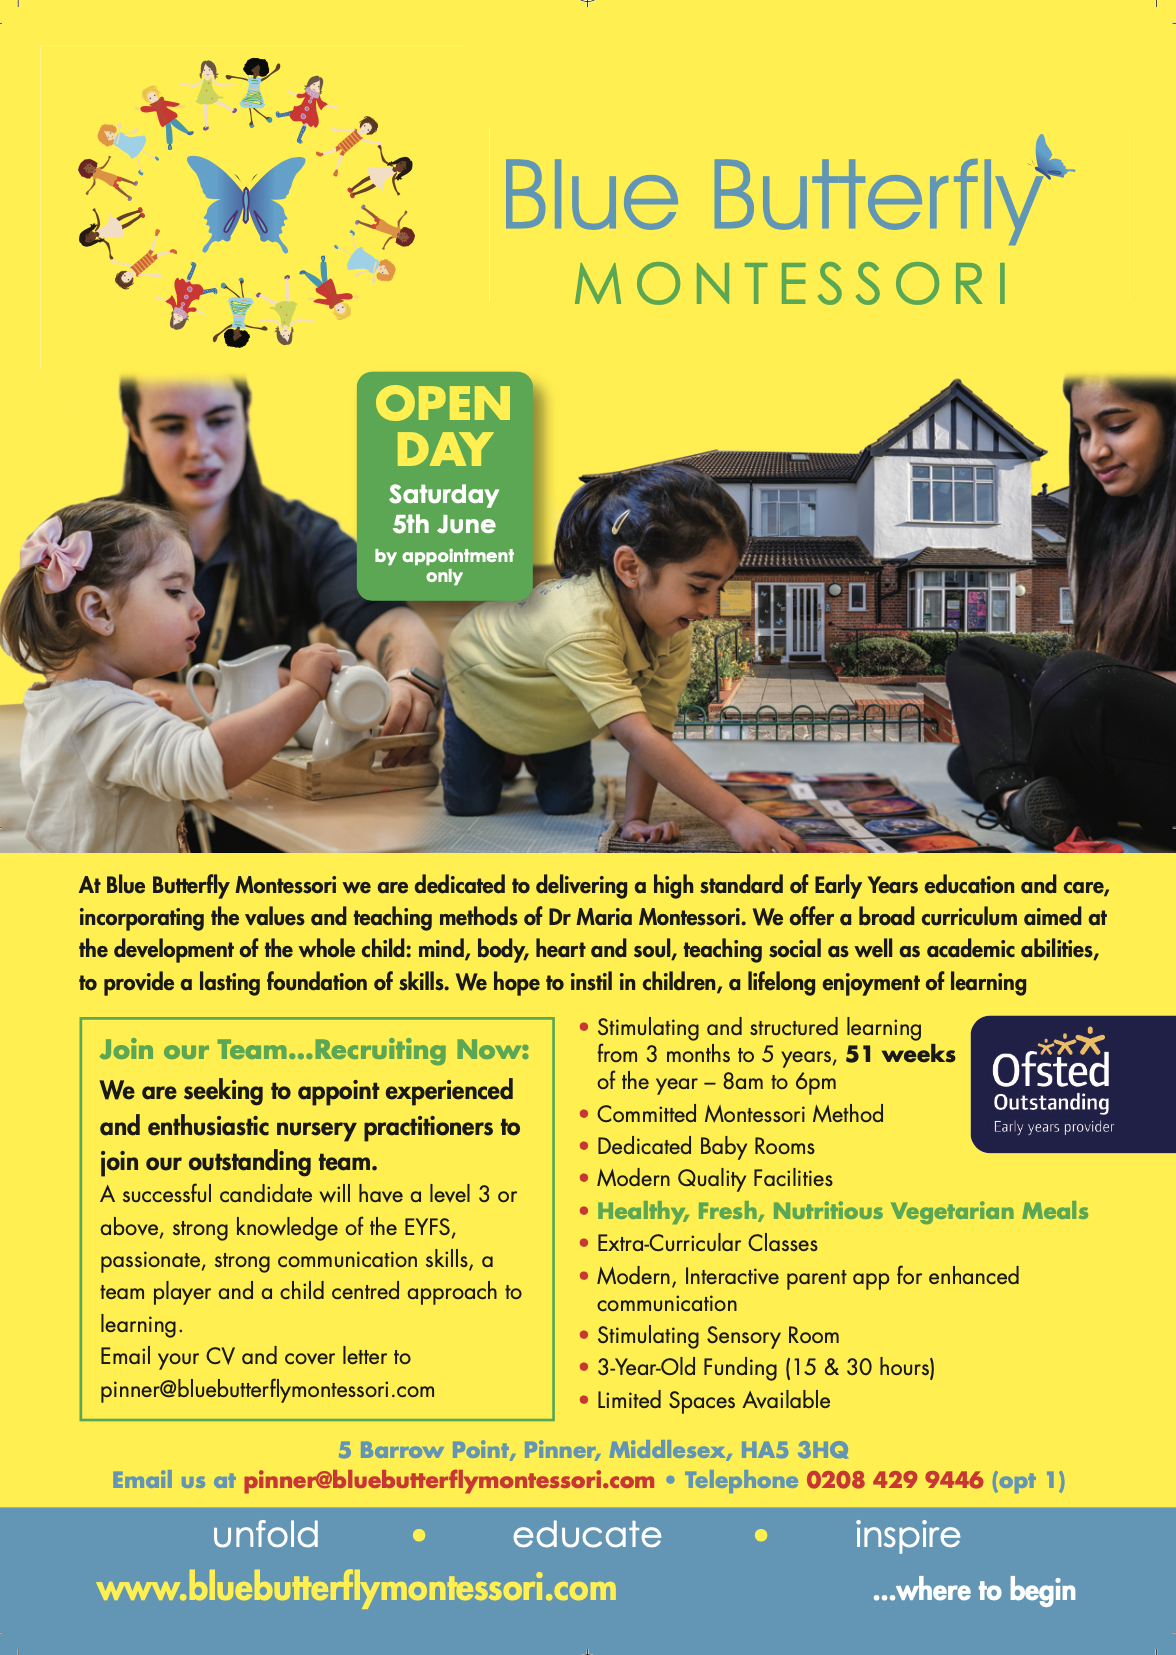 We are excited to annouce we are having an Open Day on Saturday the 5th June from 9.00am - 4.00pm, we would love you to visit us. Appointments are necessary for the day, to book a time slot, please email us at pinner@bluebutterflymontessori.com We were awarded 'Outstanding' from OFSTED on our last inspection. We would love to show you around our facilities, introduce you to some of our highly qualified, passionate staff, show you activities that your children would taker part in reguarly and speak to the managemnt team about our ethos and availability, here at Blue Butterfly Montessori, Pinner.